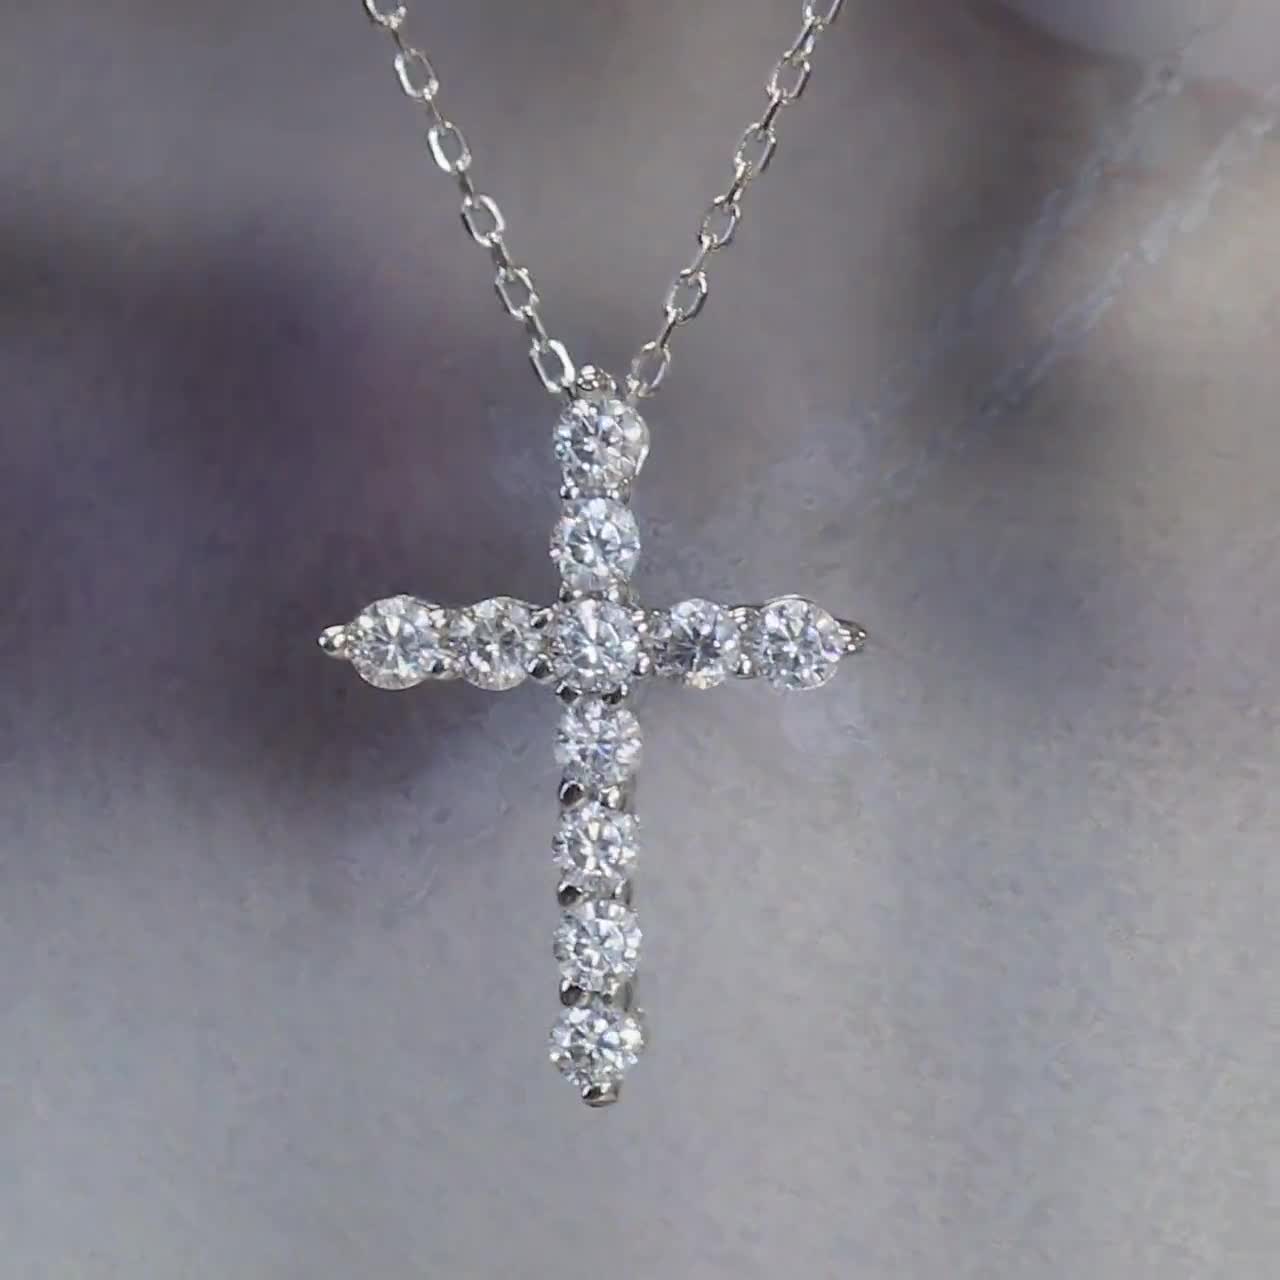 18mm6mm Classical 925 Sterling Silver Women Cross Pendant Chain with Cubic Zirconia/CZ